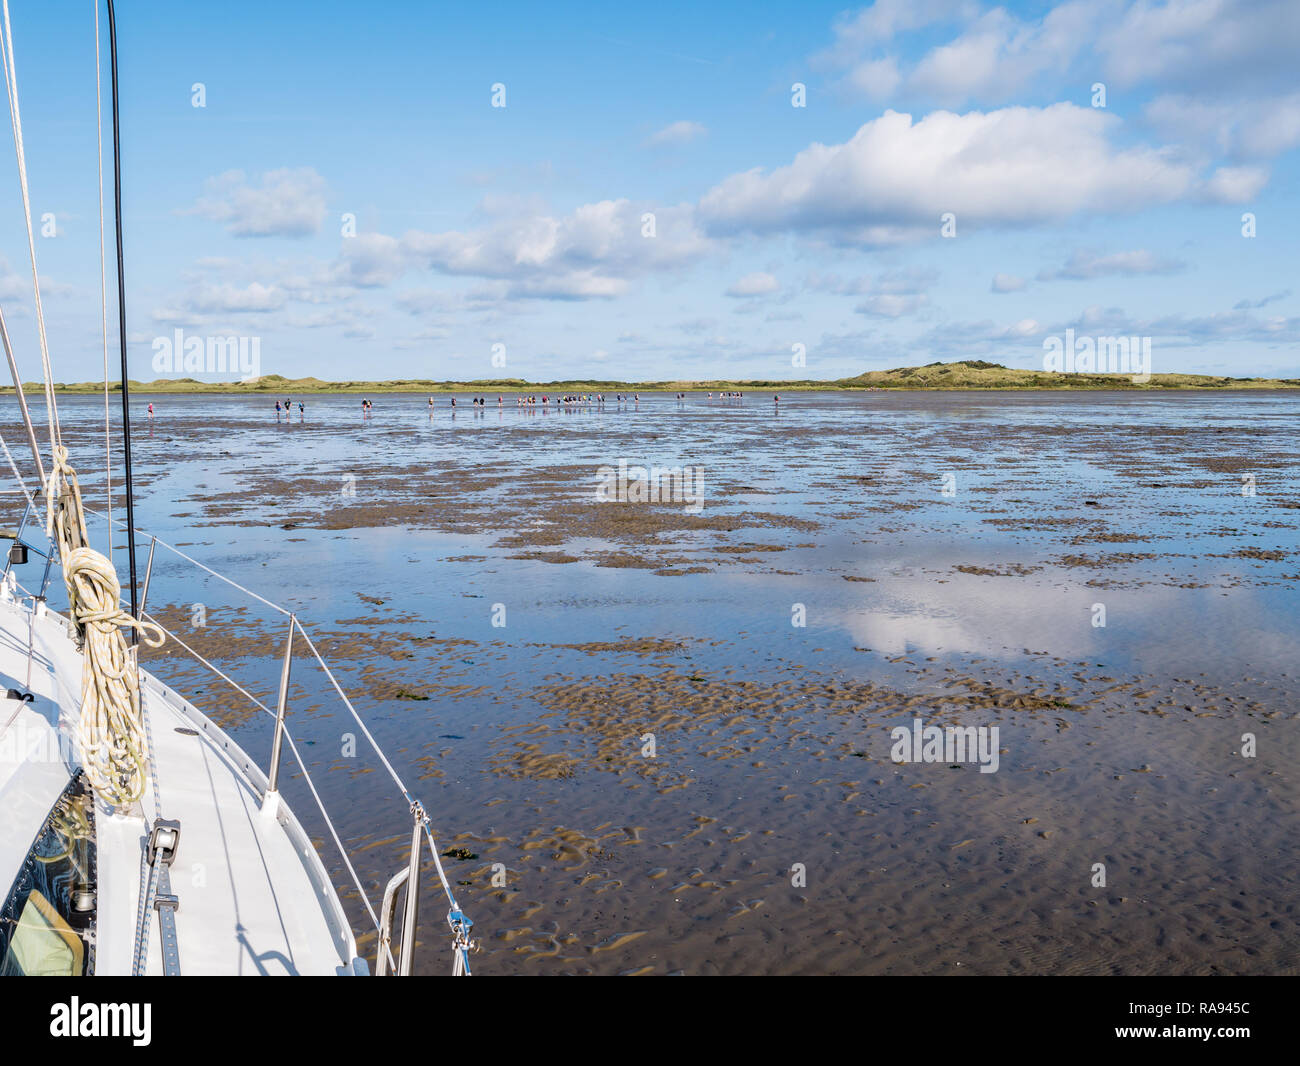 Group of people mud flat hiking on Wadden Sea at low tide from Friesland to West Frisian island Ameland, Netherlands Stock Photo